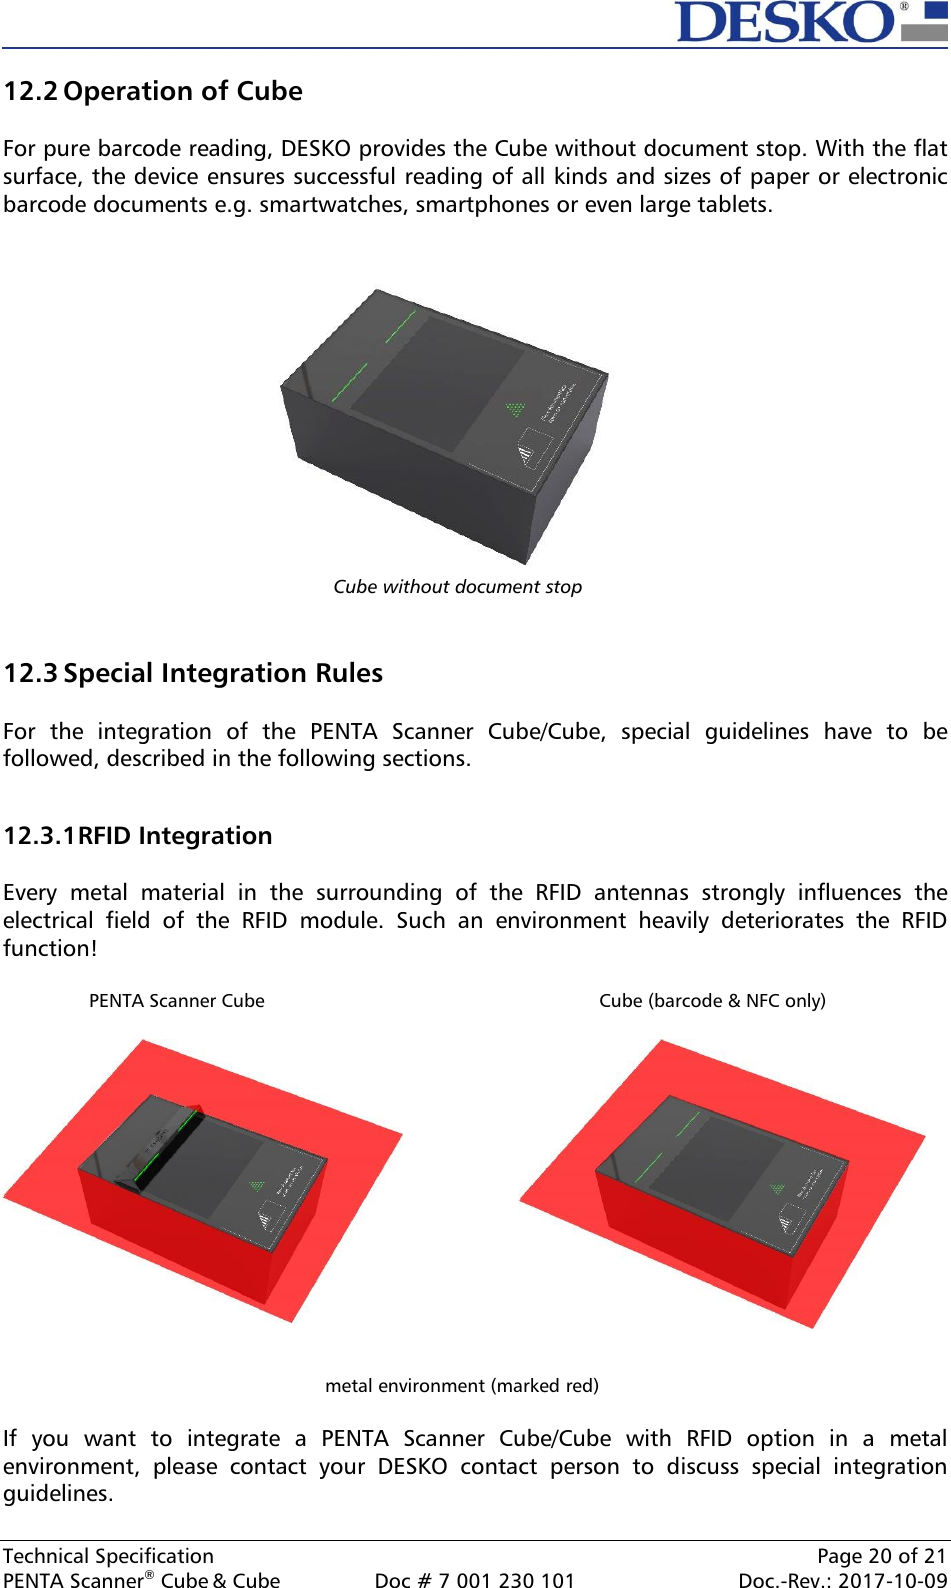  Technical Specification    Page 20 of 21 PENTA Scanner® Cube &amp; Cube  Doc # 7 001 230 101  Doc.-Rev.: 2017-10-09    Cube without document stop 12.2 Operation of Cube  For pure barcode reading, DESKO provides the Cube without document stop. With the flat surface, the device ensures successful reading of all kinds and sizes of paper or electronic barcode documents e.g. smartwatches, smartphones or even large tablets.               12.3 Special Integration Rules  For  the  integration  of  the  PENTA  Scanner  Cube/Cube,  special  guidelines  have  to  be followed, described in the following sections.  12.3.1 RFID Integration  Every  metal  material  in  the  surrounding  of  the  RFID  antennas  strongly  influences  the electrical  field  of  the  RFID  module.  Such  an  environment  heavily  deteriorates  the  RFID function!                  PENTA Scanner Cube        Cube (barcode &amp; NFC only)     metal environment (marked red)  If  you  want  to  integrate  a  PENTA  Scanner  Cube/Cube  with  RFID  option  in  a  metal environment,  please  contact  your  DESKO  contact  person  to  discuss  special  integration guidelines.   